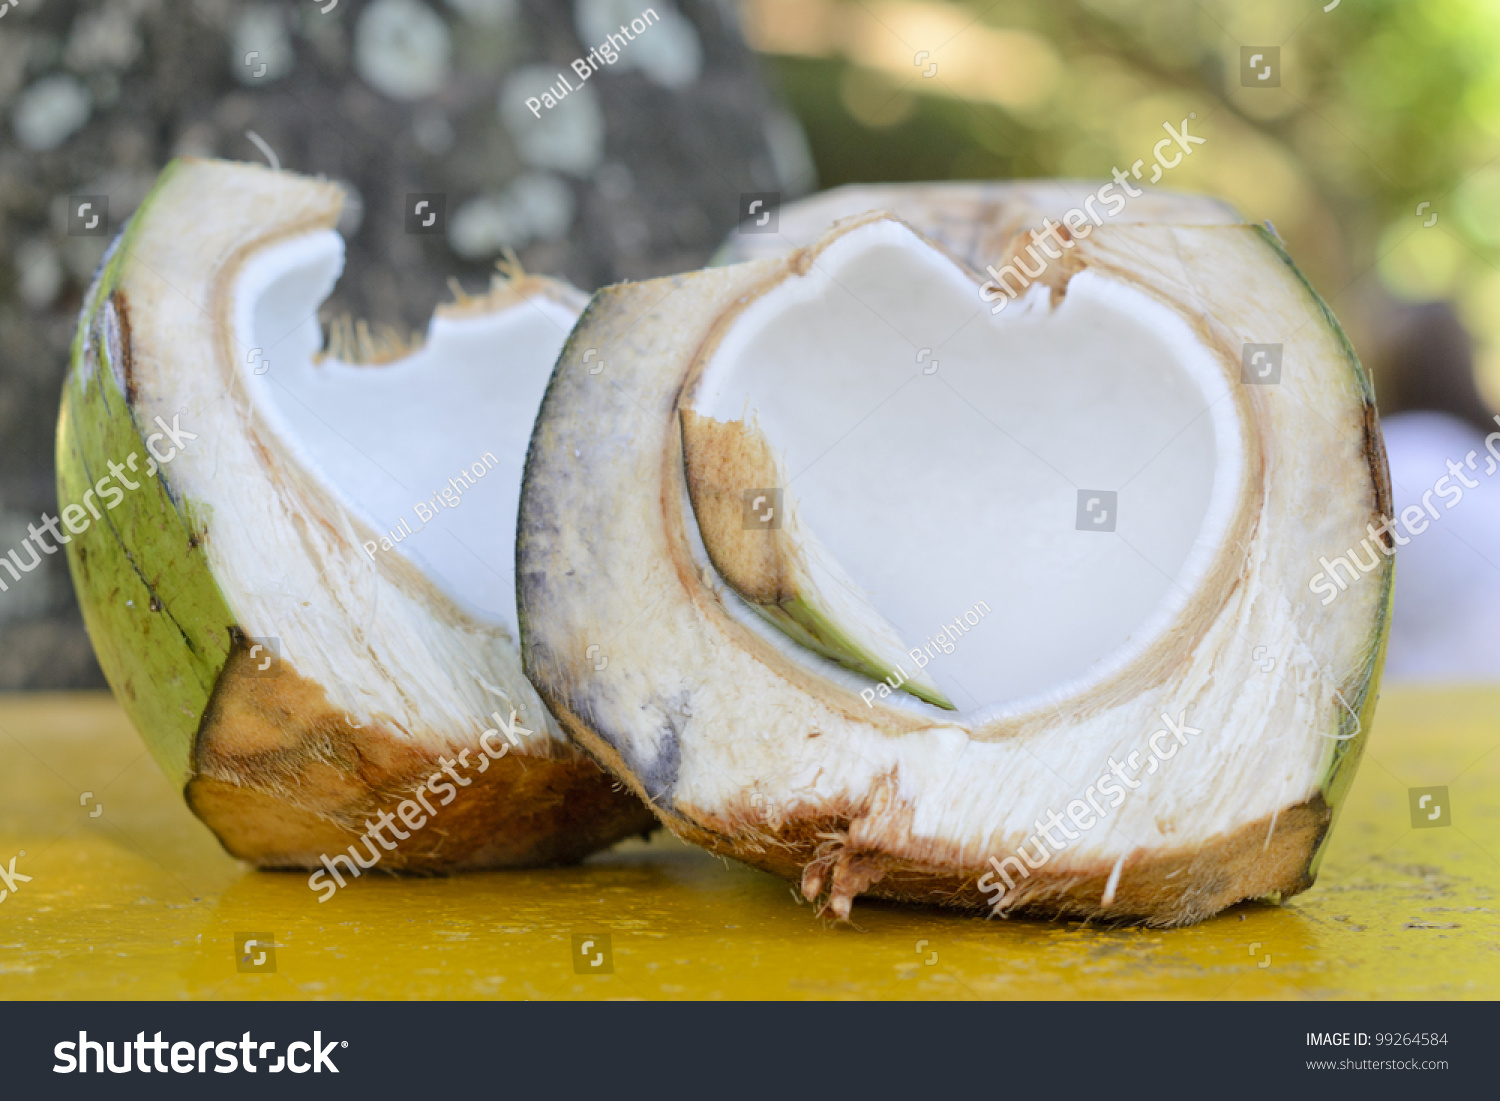 Coconut Tropical Green Coconut Opened Flesh Stock Photo 99264584 ...